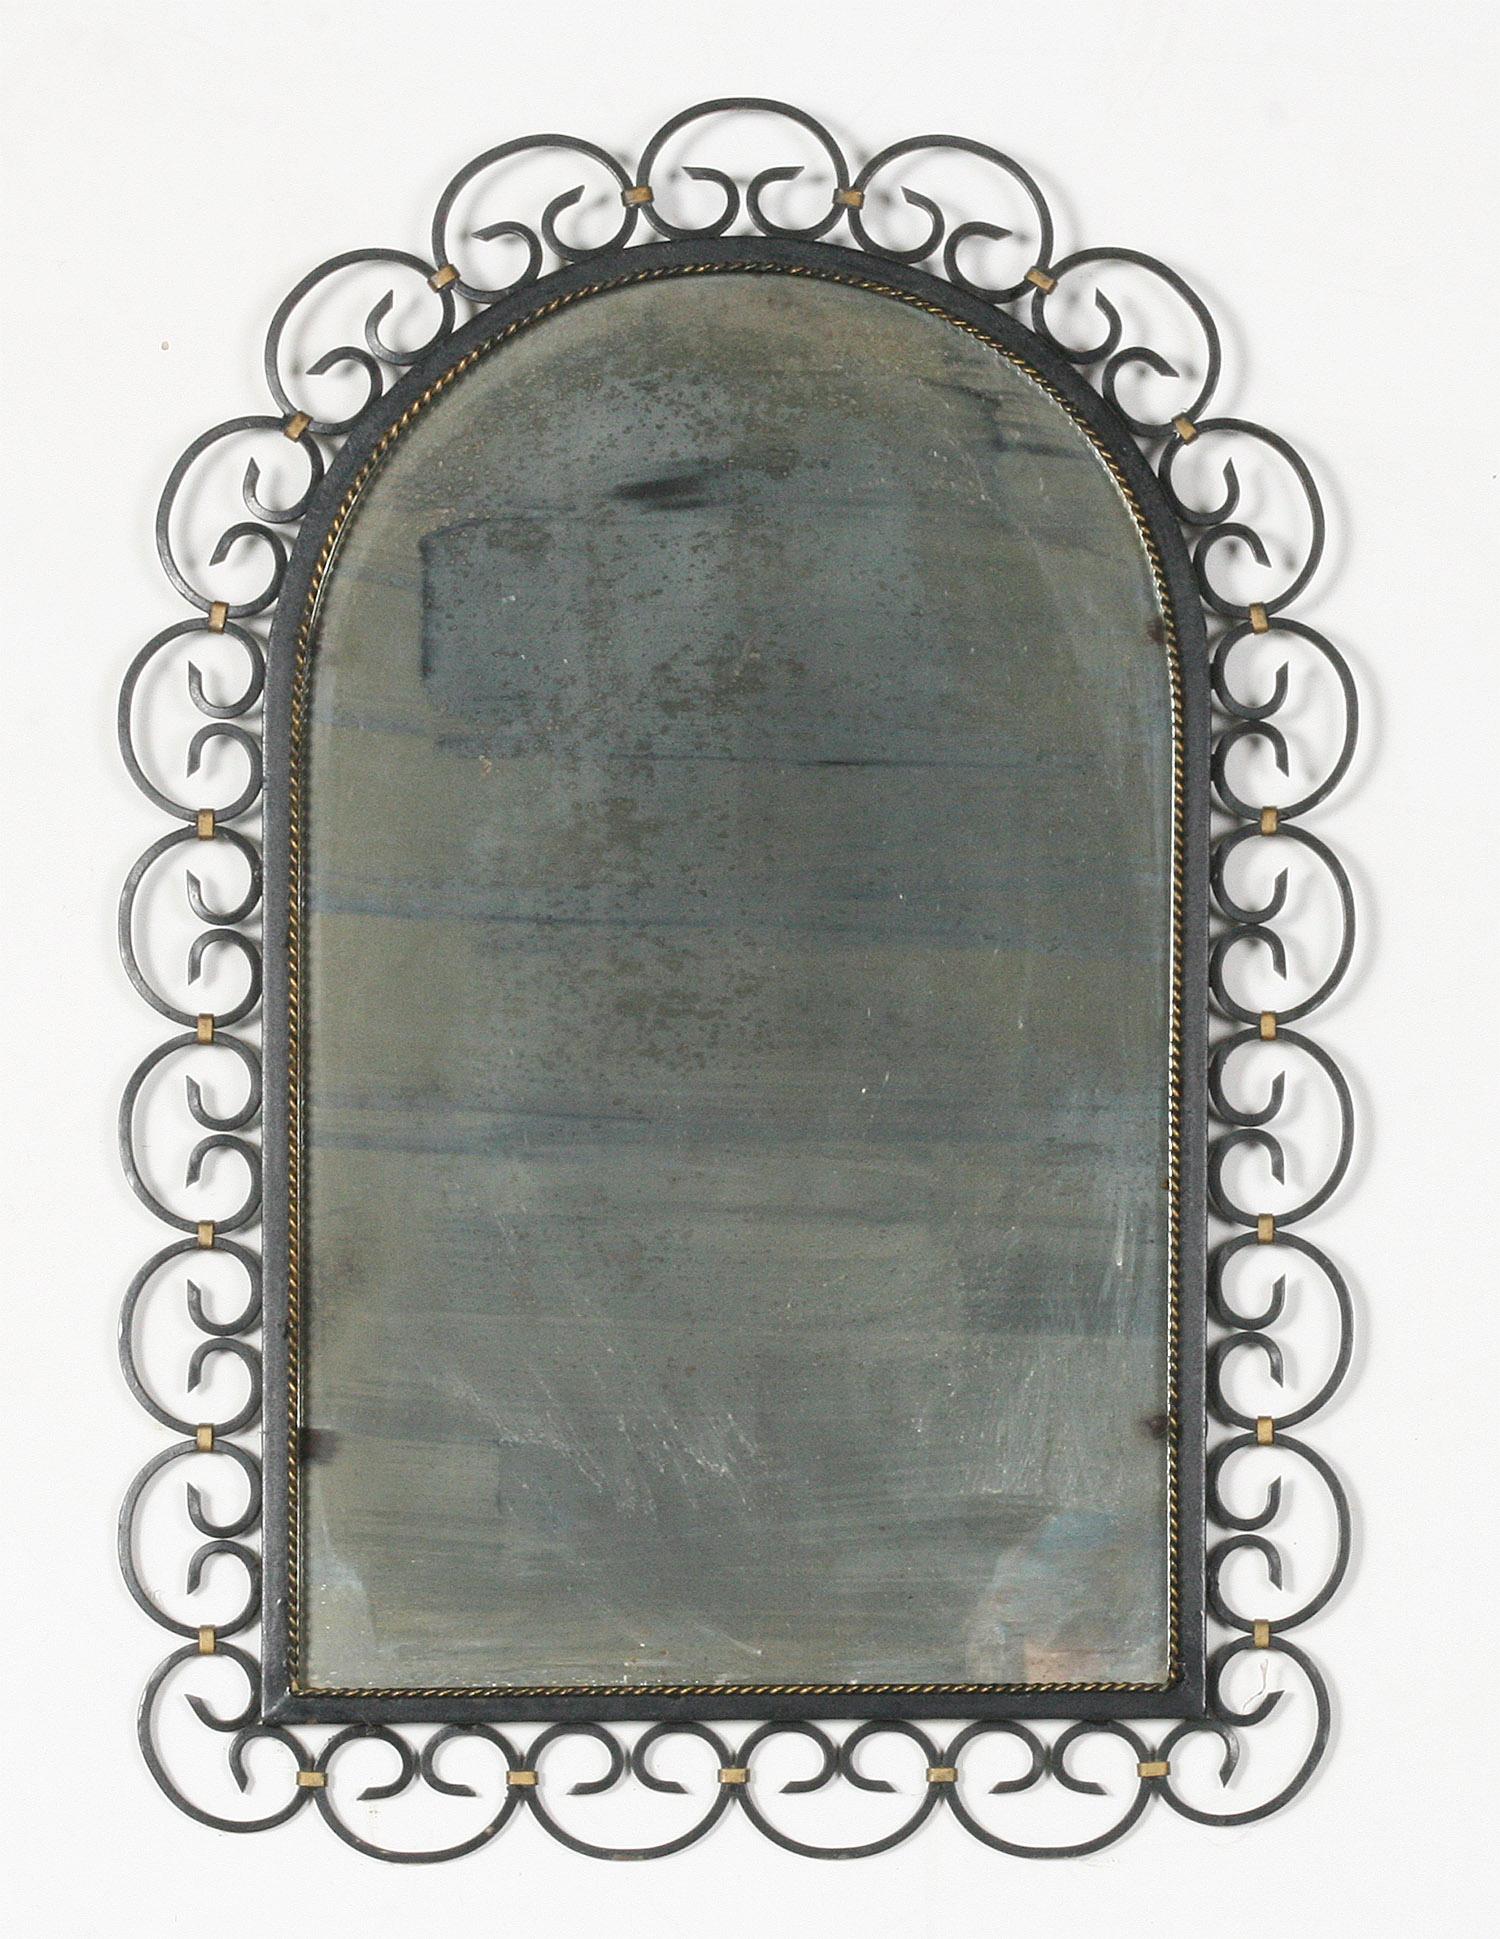 Beautiful mid-20th century design mirror, the frame is made of wrought iron.
Some aging stains on the glass mirror. Furthermore, in good condition.
Made in France circa 1930.